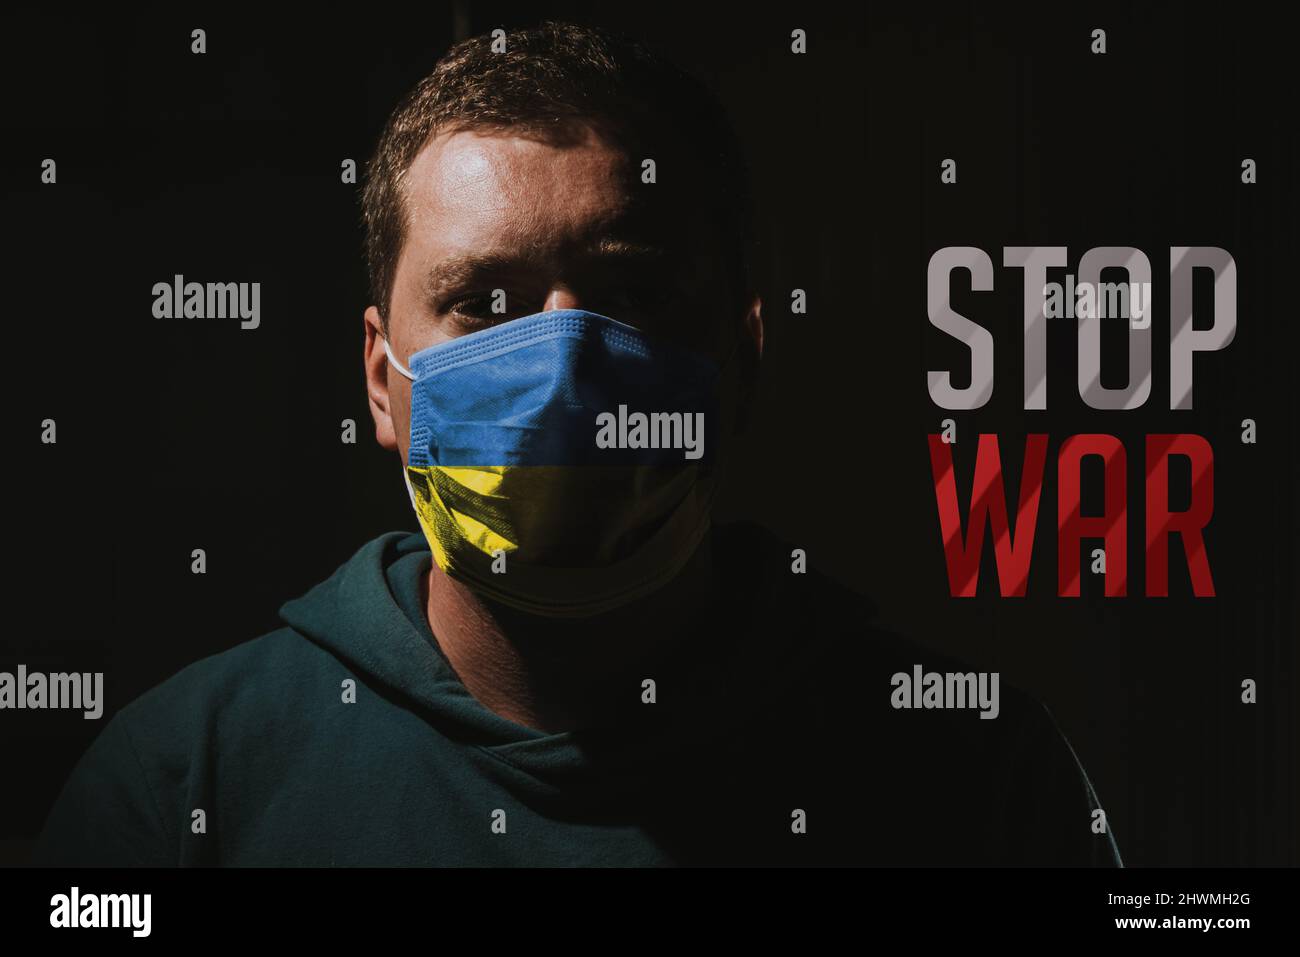 man with Ukraine flag mask with text stop war Stock Photo